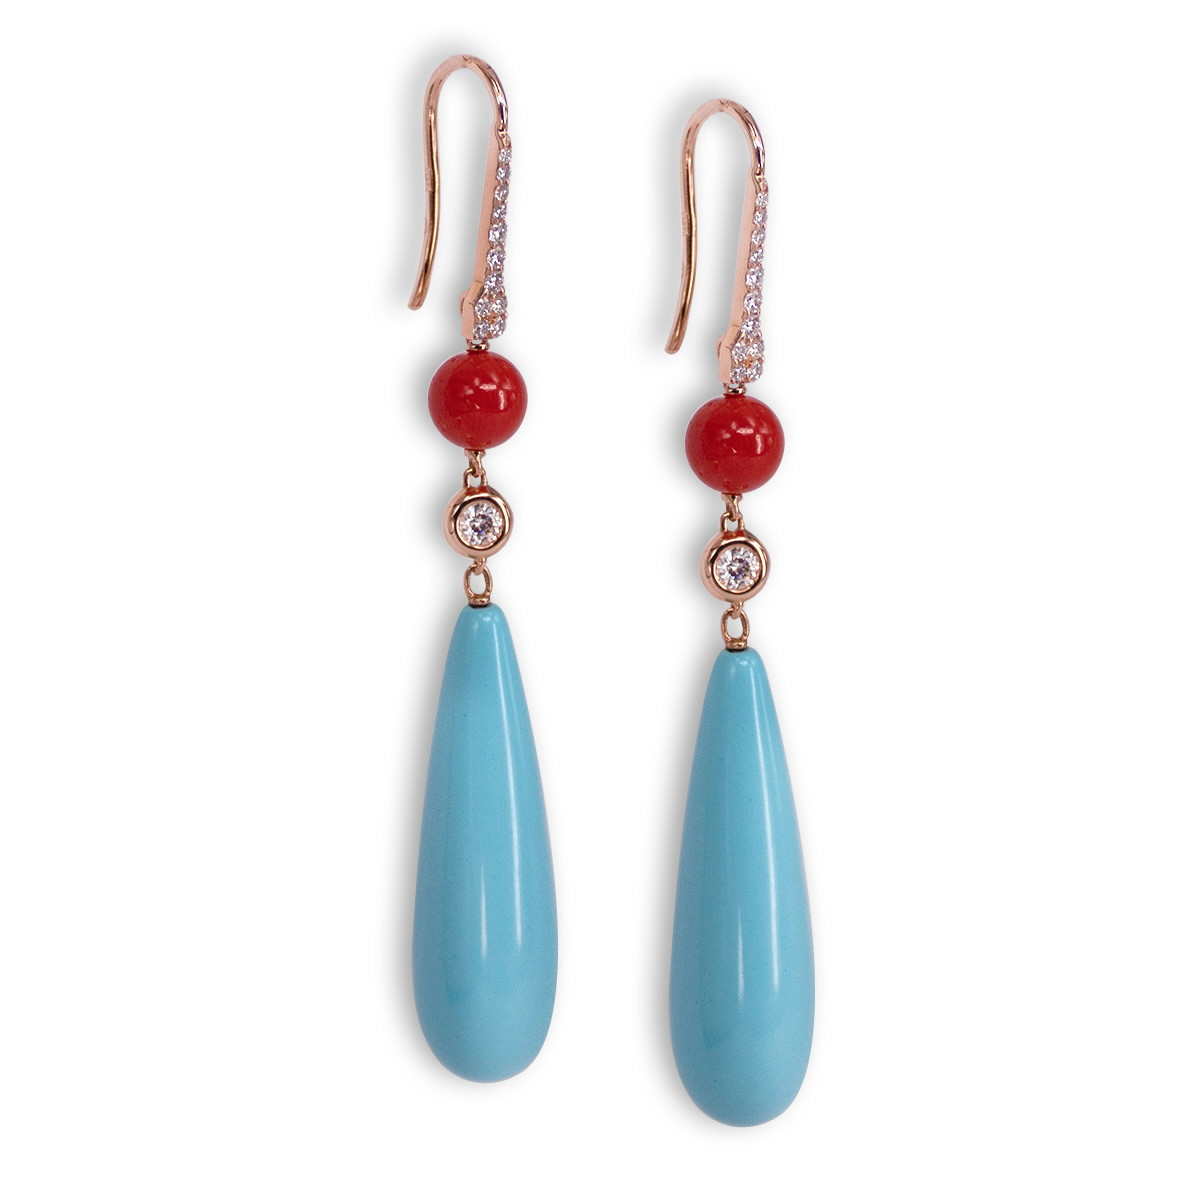 ROSE GOLD EARRINGS WITH CORAL, TURQUOISE & DIAMONDS